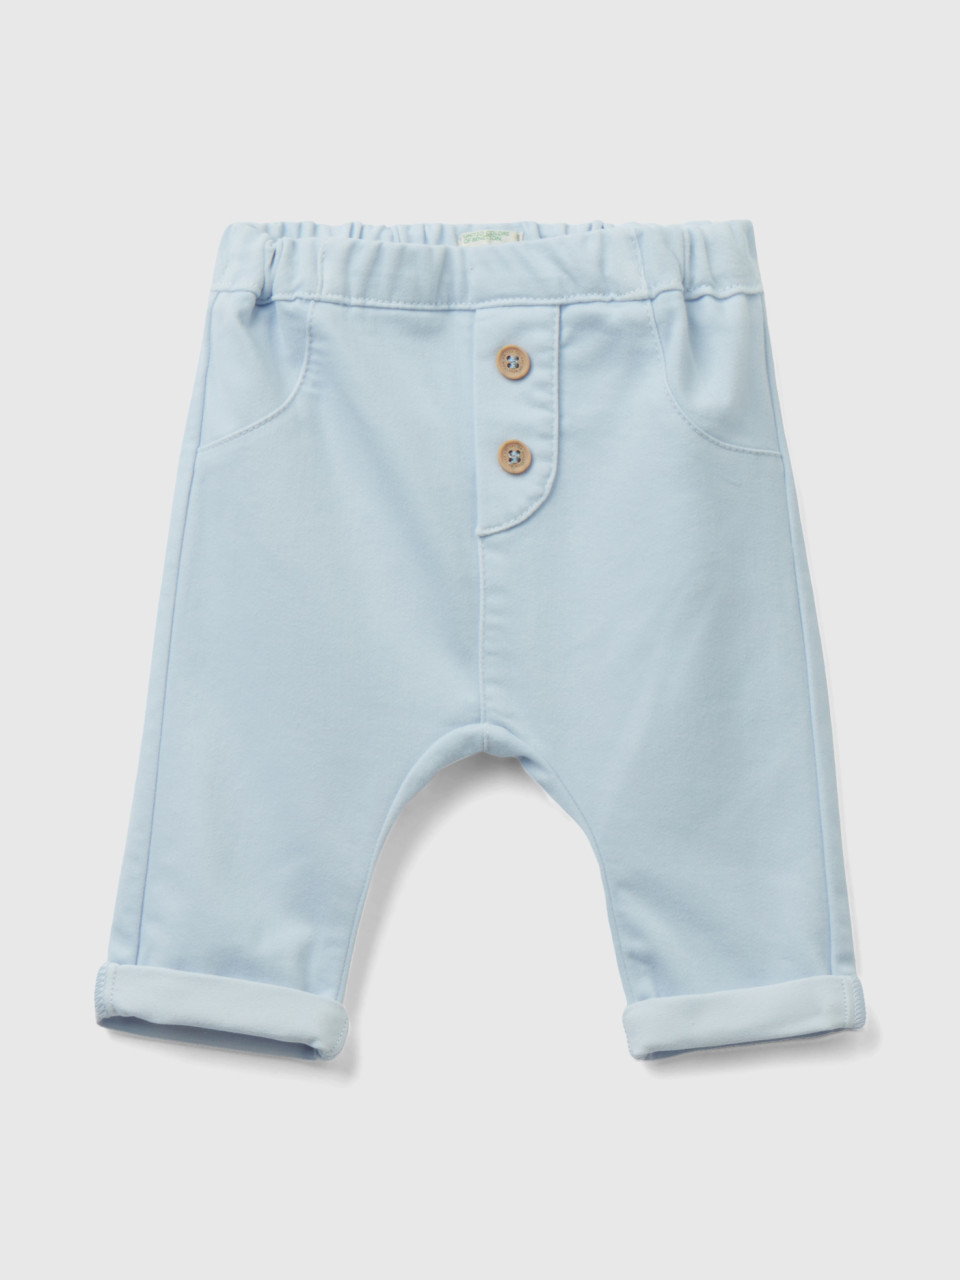 Benetton, Trousers In Stretch Cotton Blend, Sky Blue, Kids